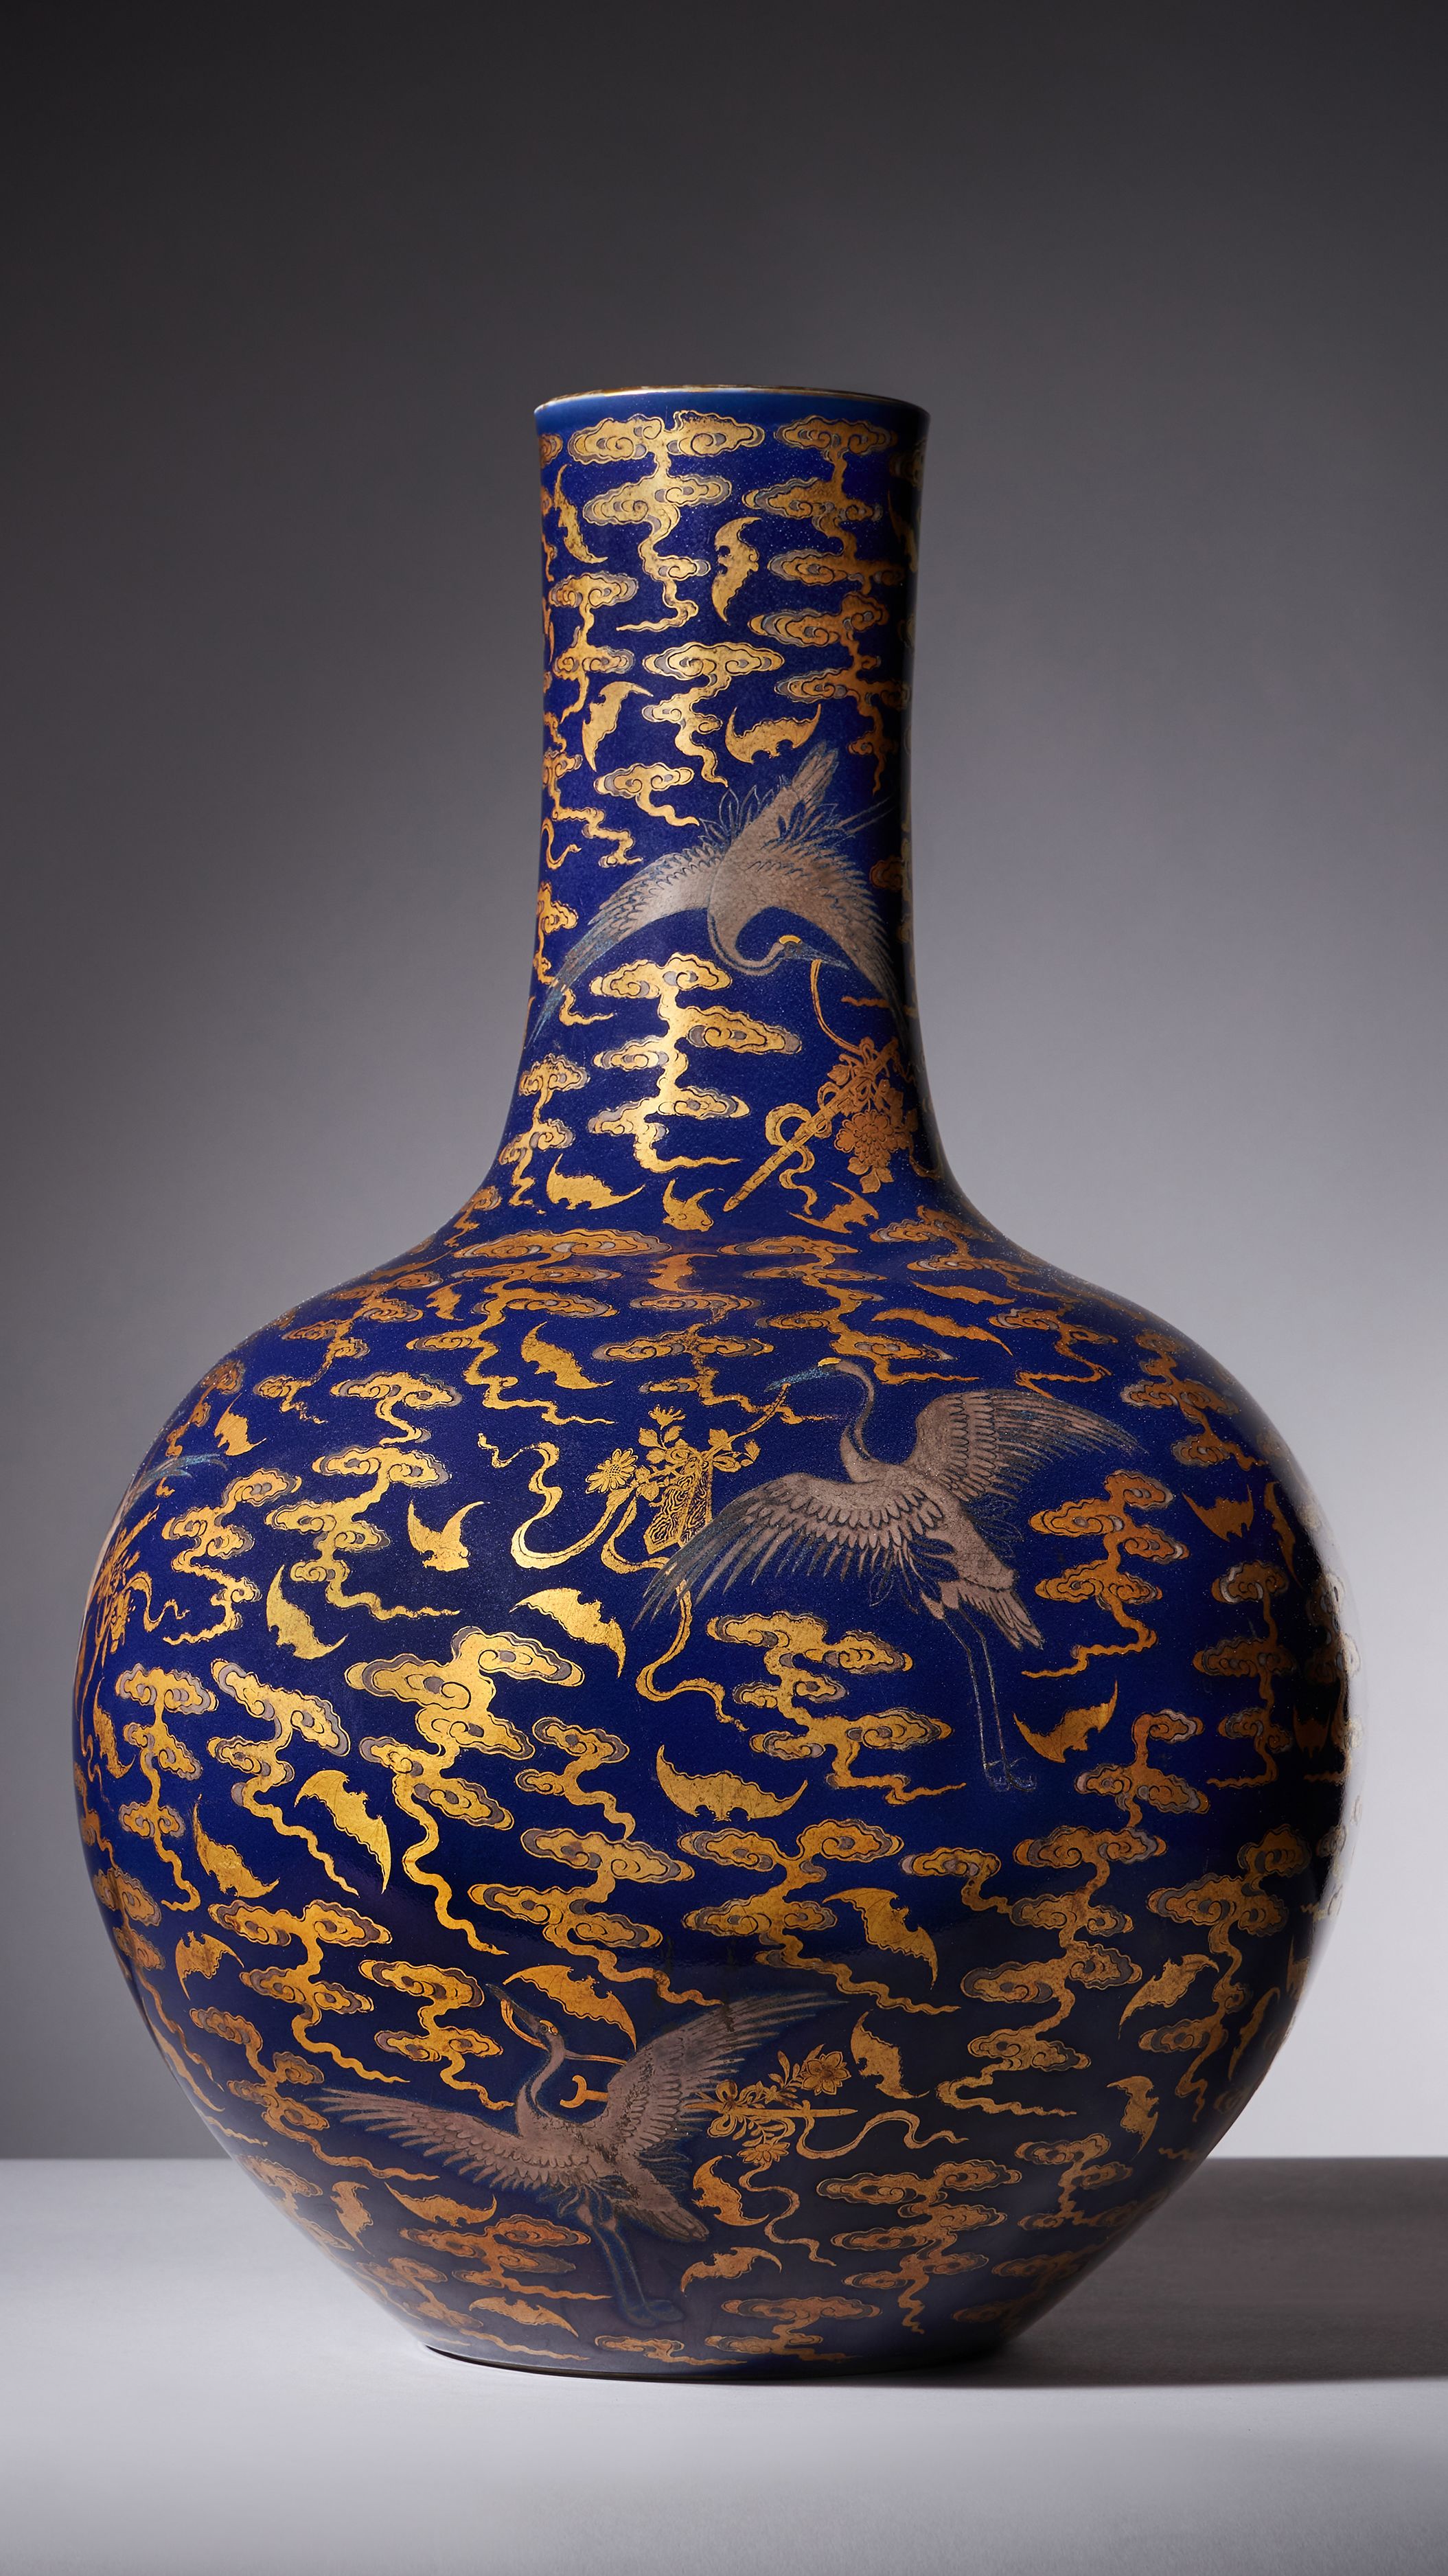 Rejse Stationær Spil Qianlong period vase found in kitchen could be worth up to $186,000 | CNN